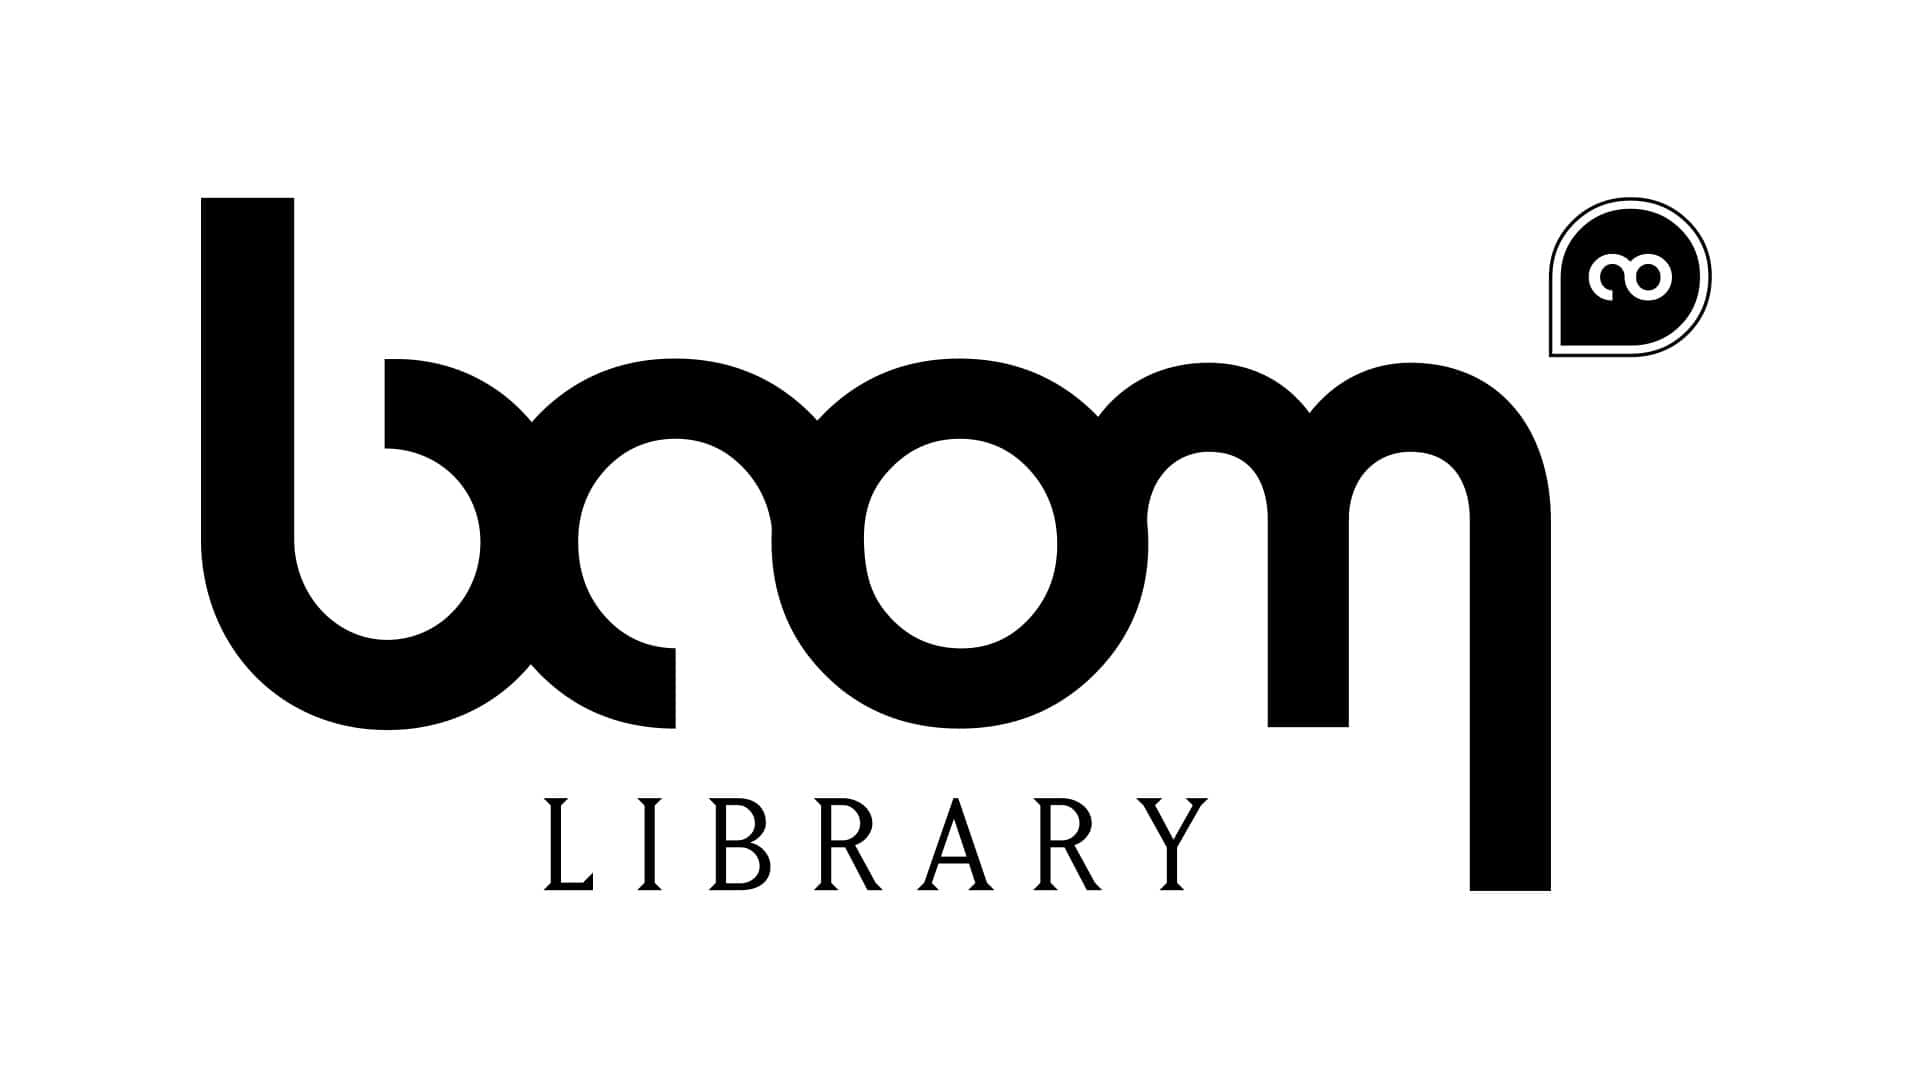 A black and white logo for broom library designed with SEO in mind.